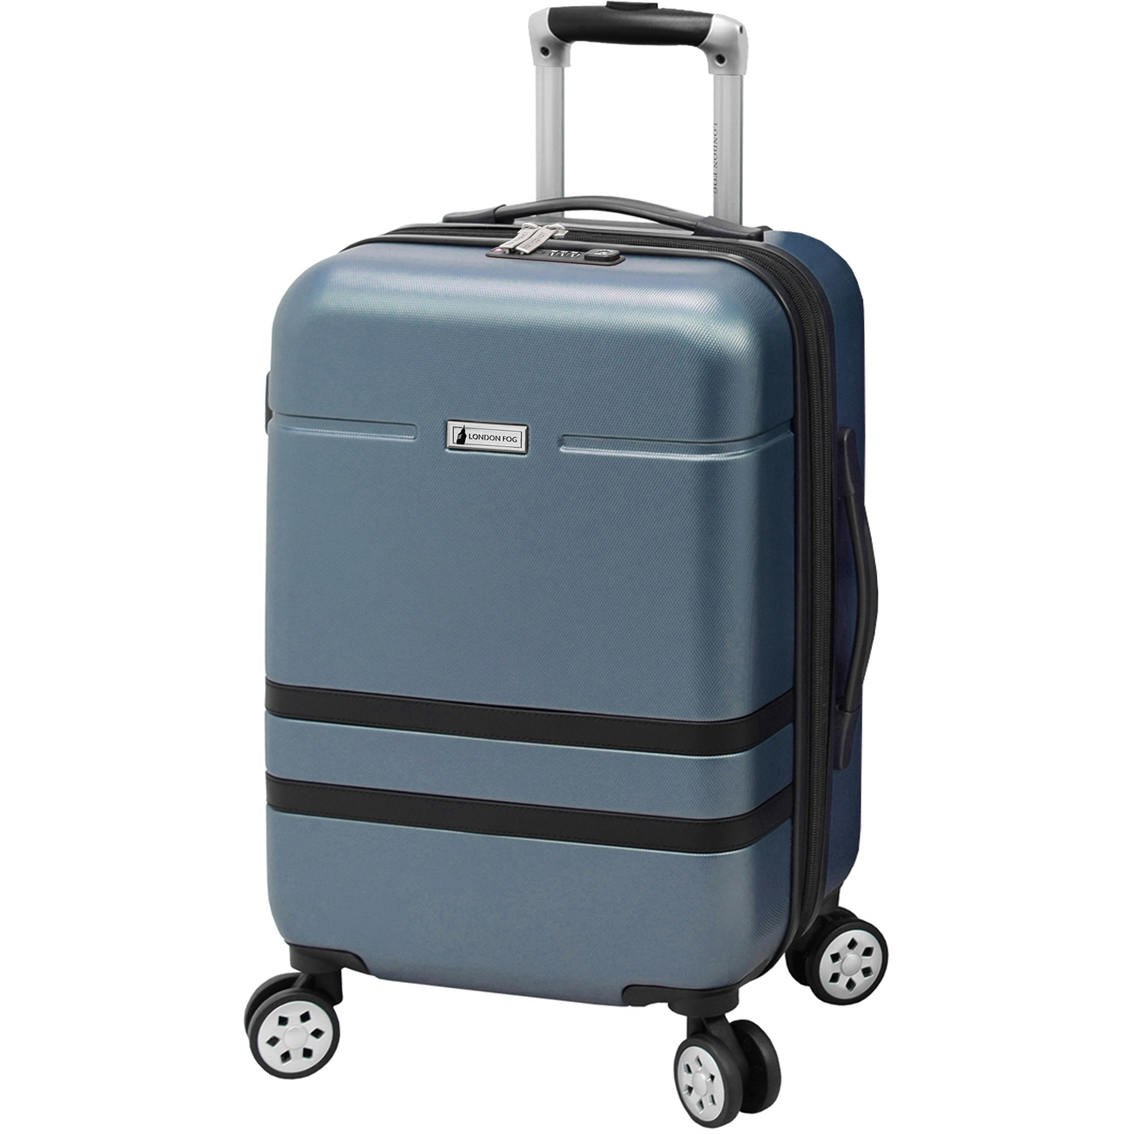 London Fog Southbury Ii 20 In. Hardside Carry On Spinner | Luggage ...